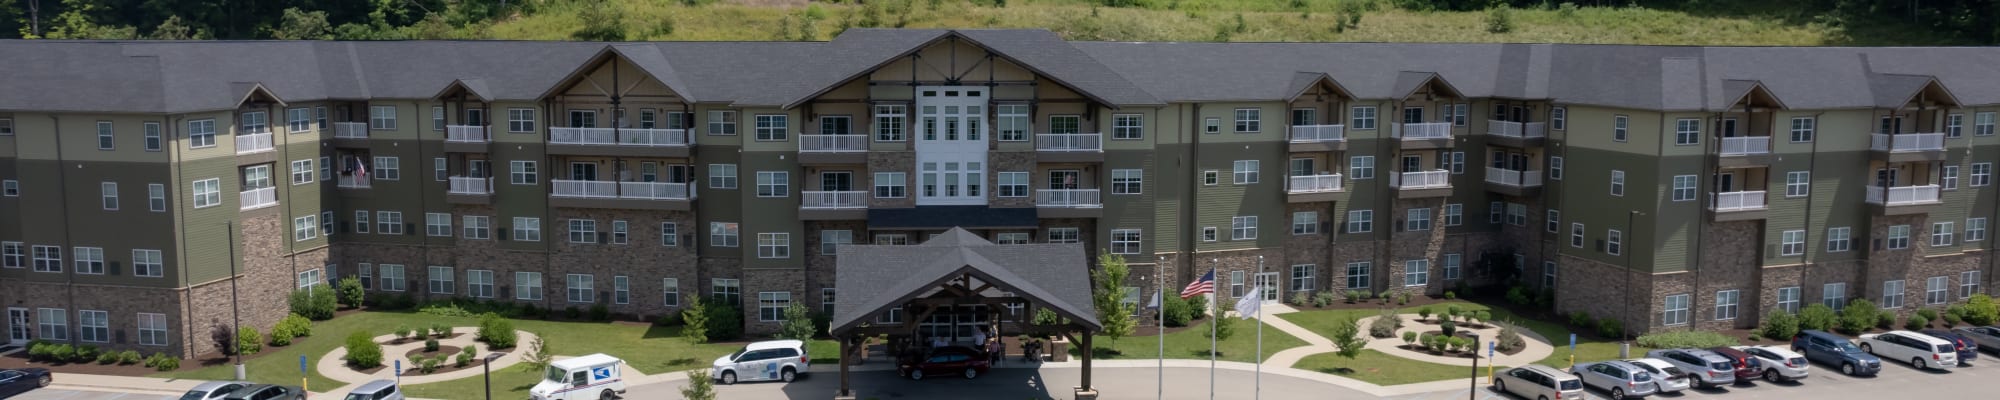 Our Community at Harmony at Morgantown in Morgantown, West Virginia